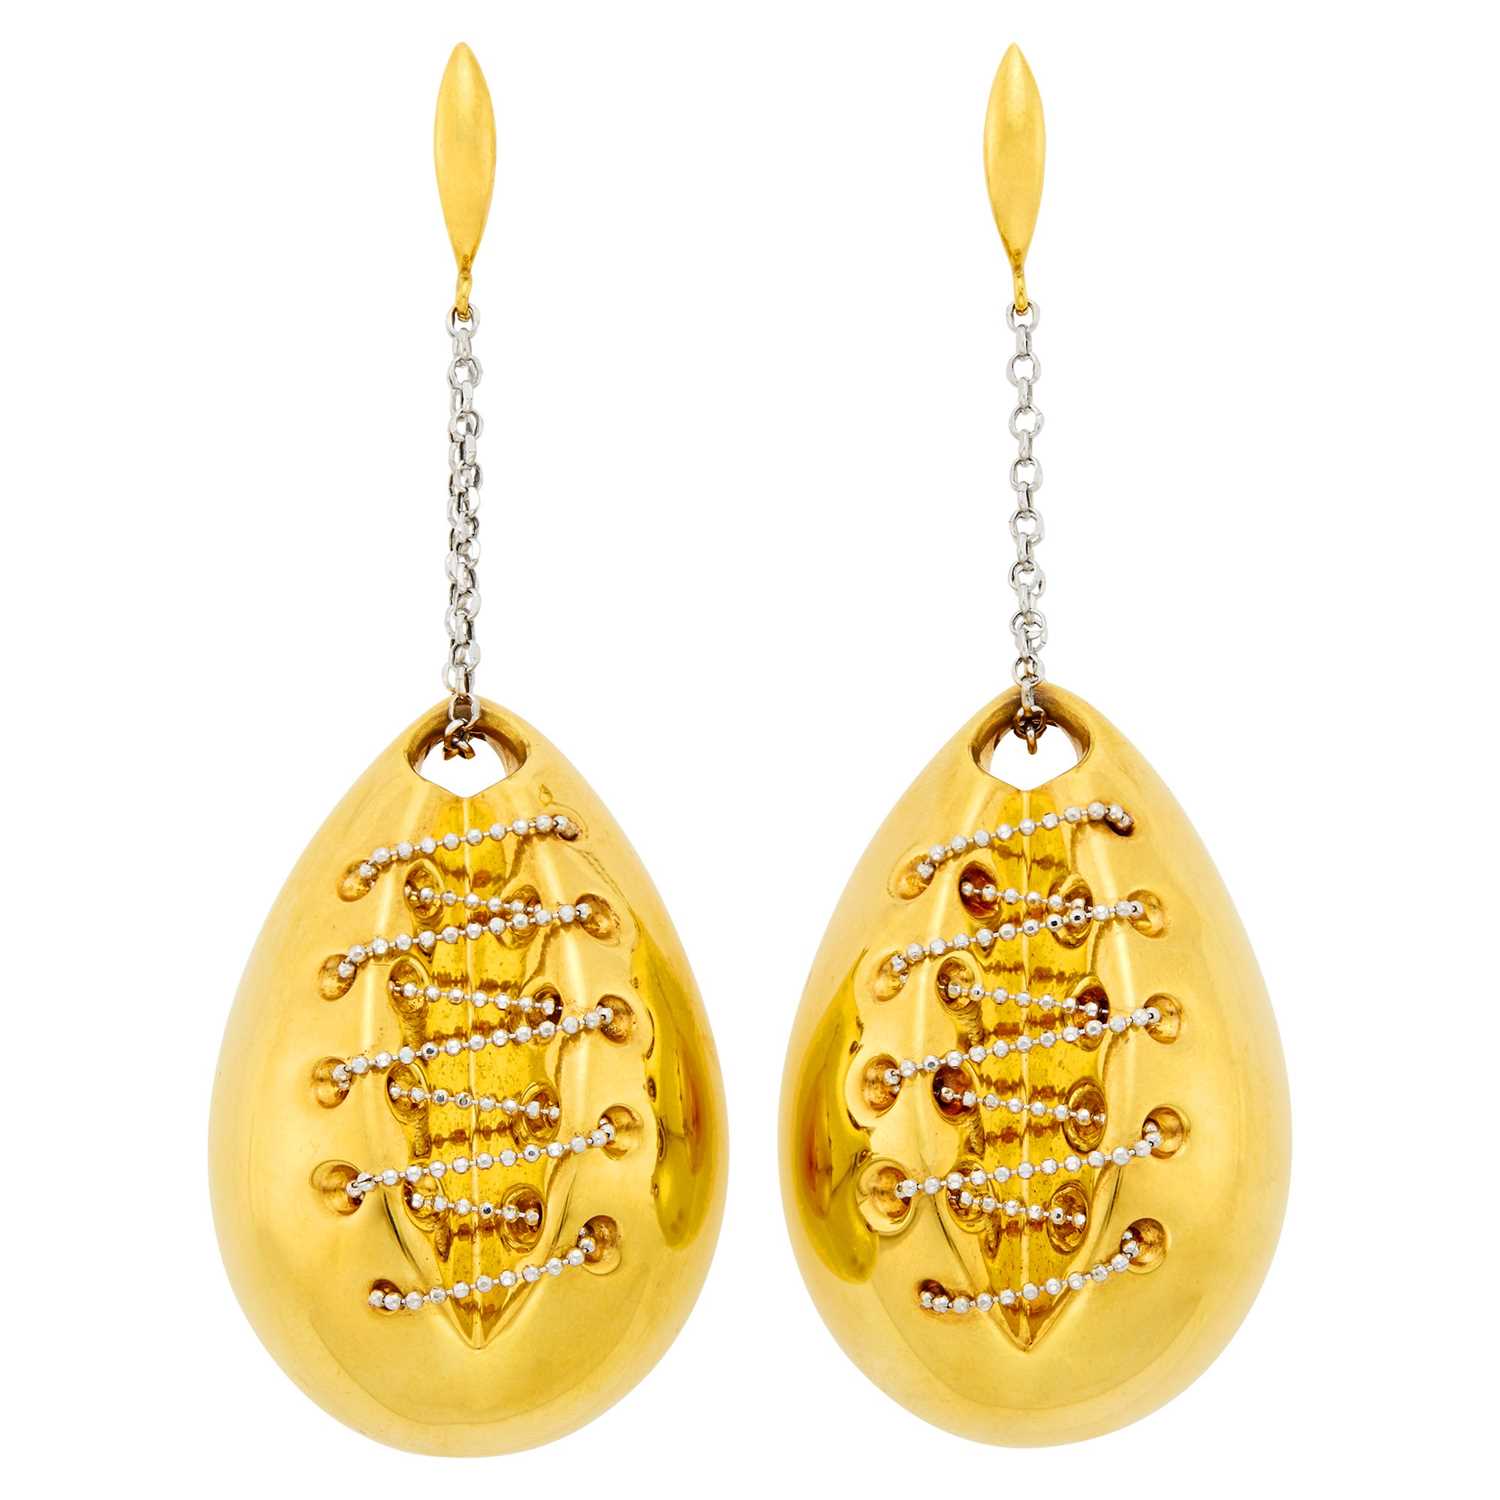 Lot 118 - Pair of Two-Color Gold Punching Bag Pendant-Earrings